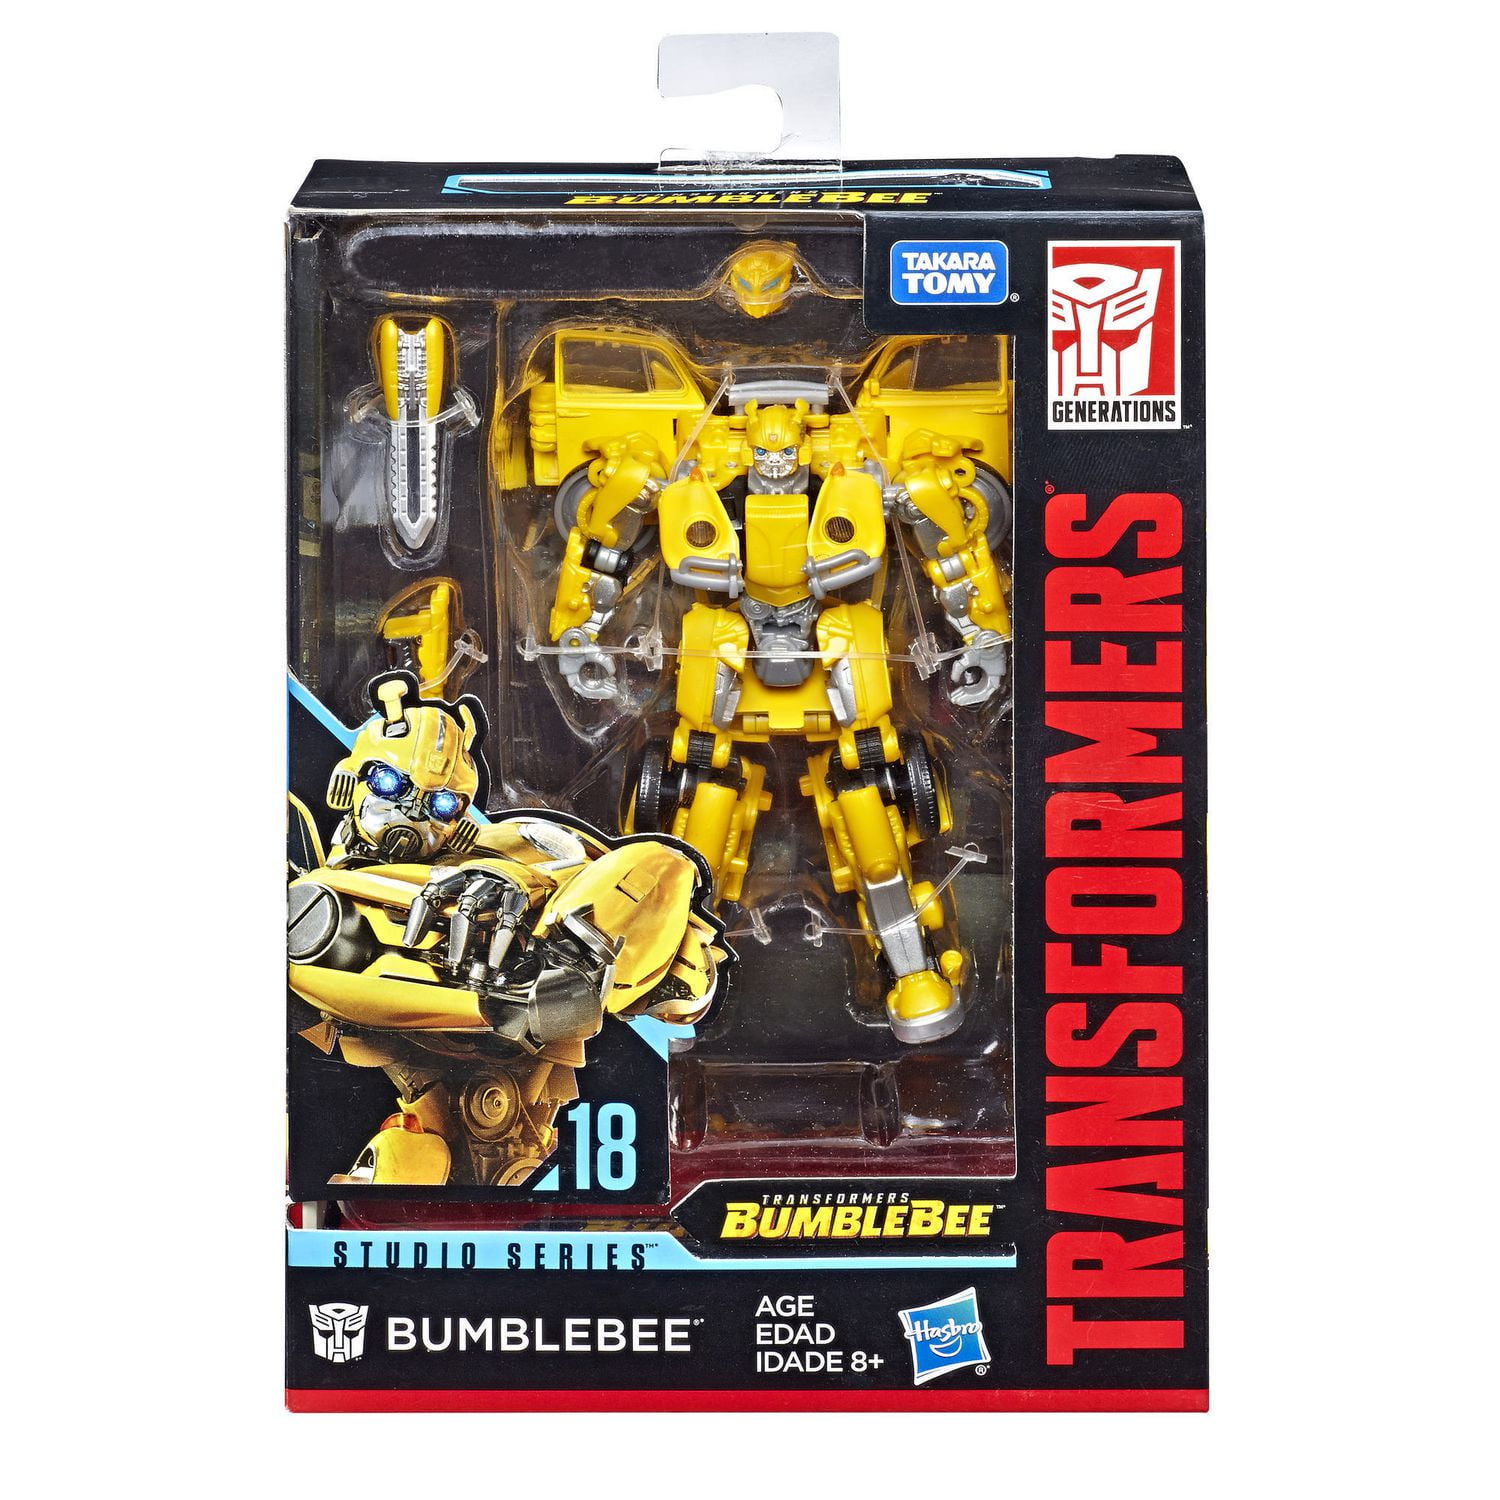 Ultimate Bumblebee Transformer, Ultimate Bumblebee ready to…